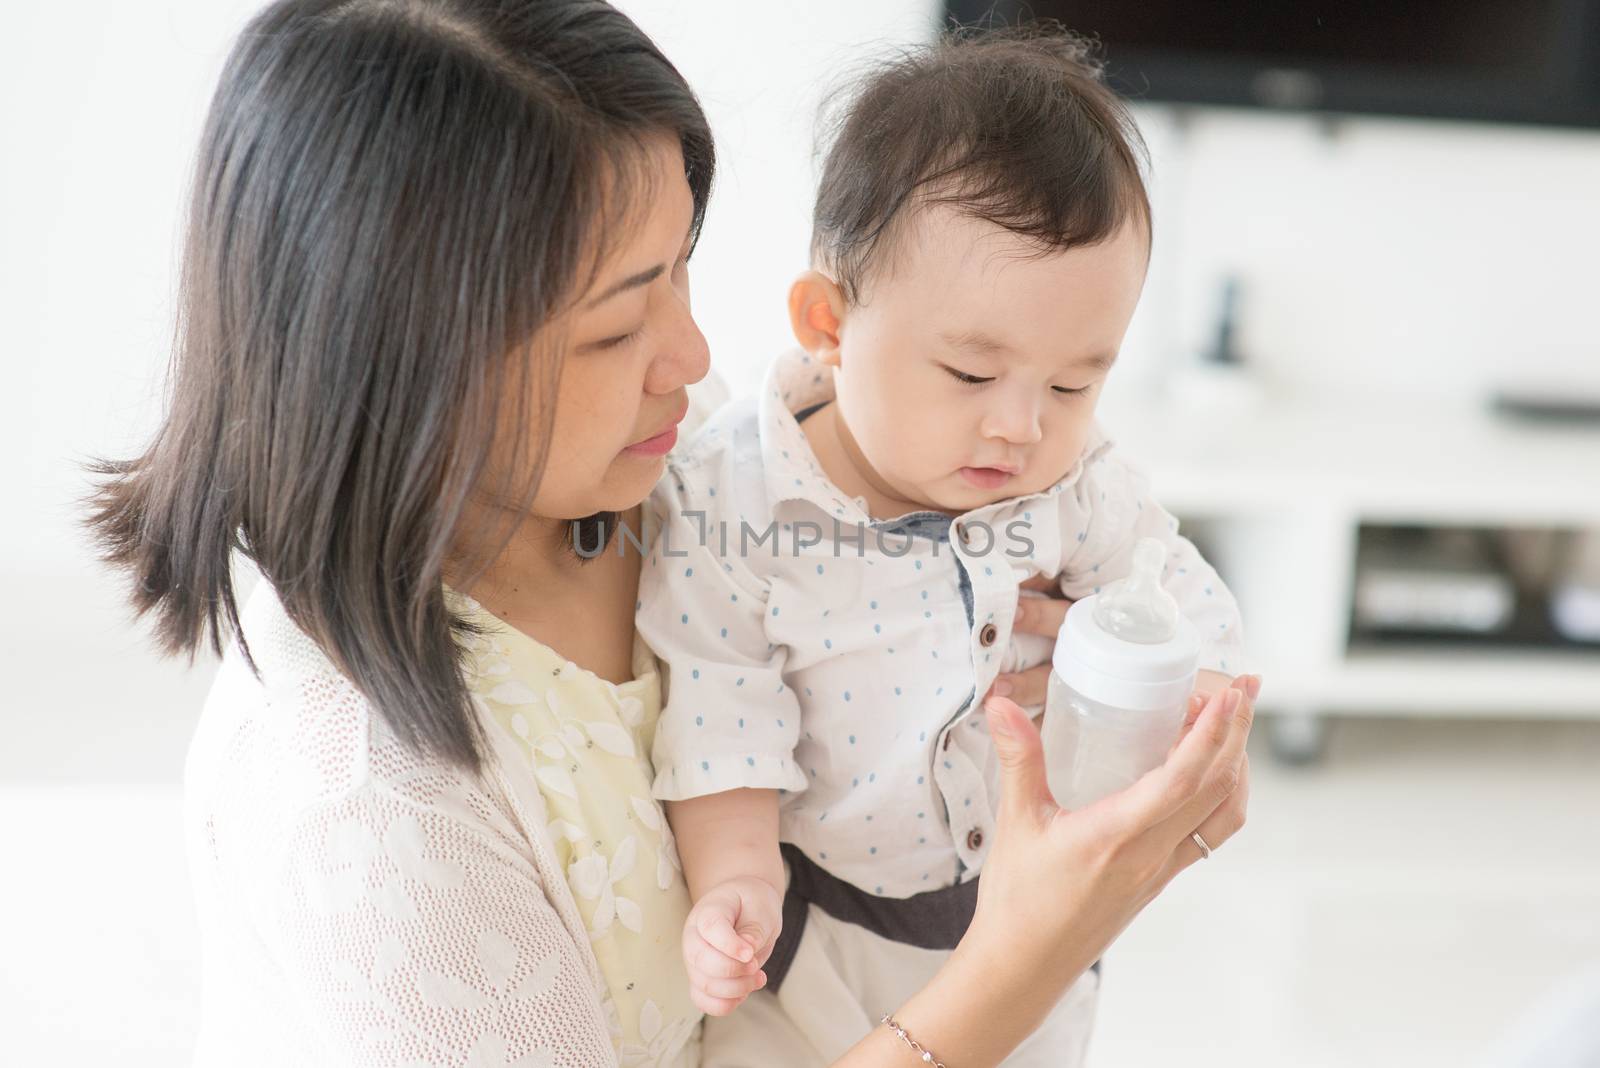 Mother holding milk bottle with 9 months old baby. Asian family at home, living lifestyle indoors.